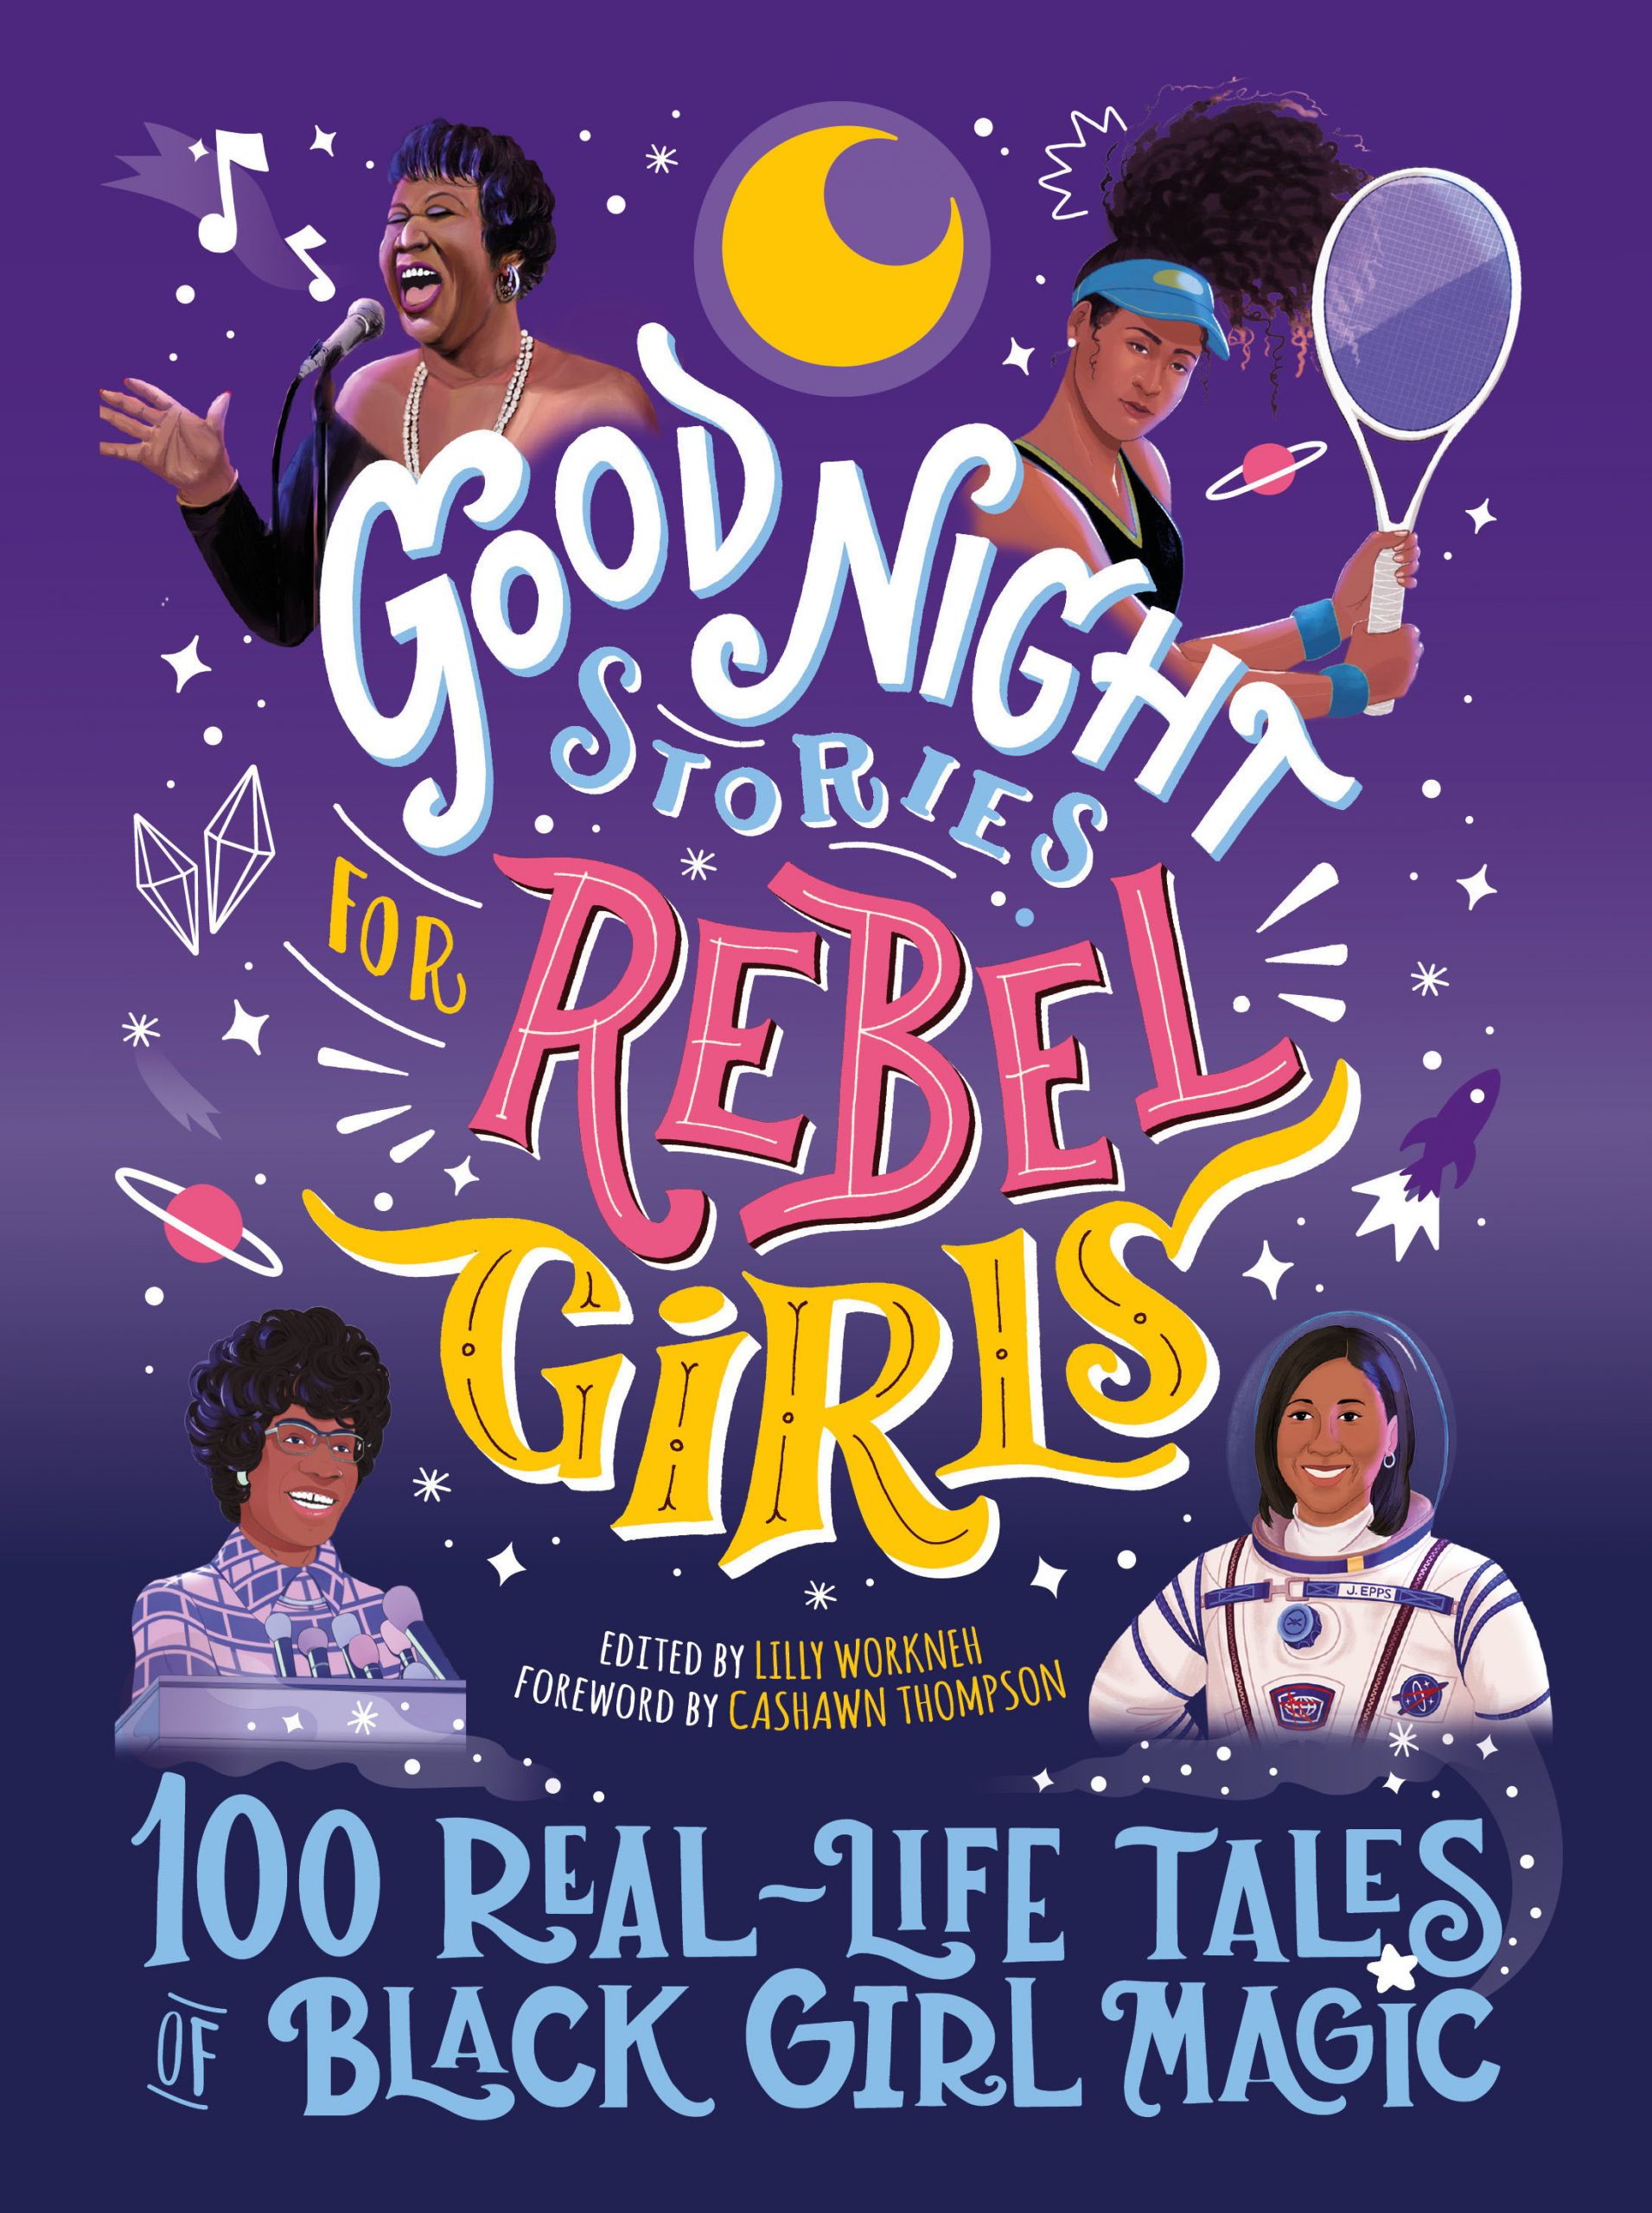 Goodnight Stories for Rebel Girls: 100 Real-Life Tales of Black Girl Magic